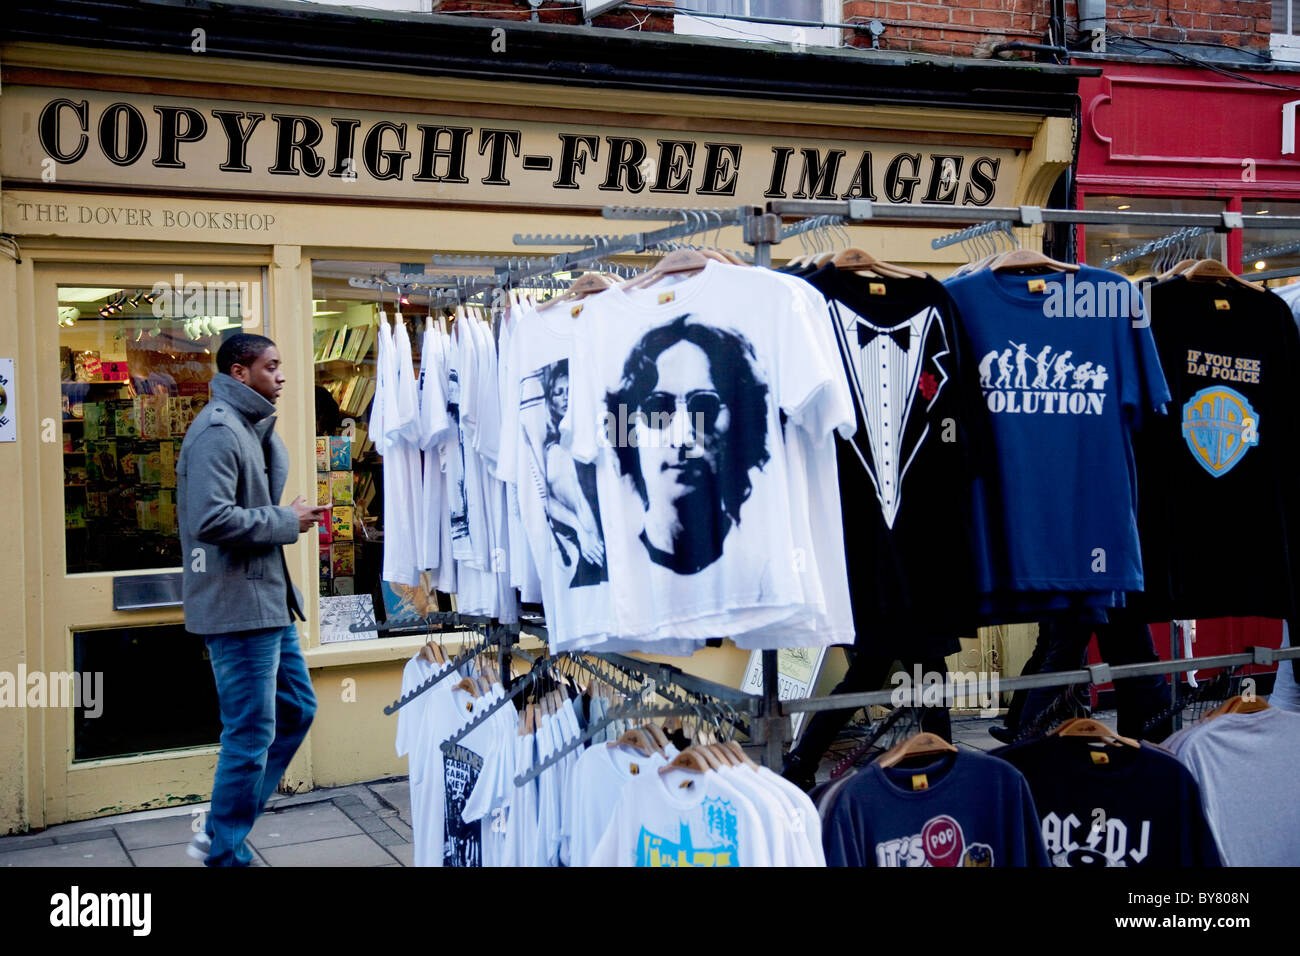 John Lennon t-shirts outside the Copyright ree Images shop in Covent Garden.  London Stock Photo - Alamy